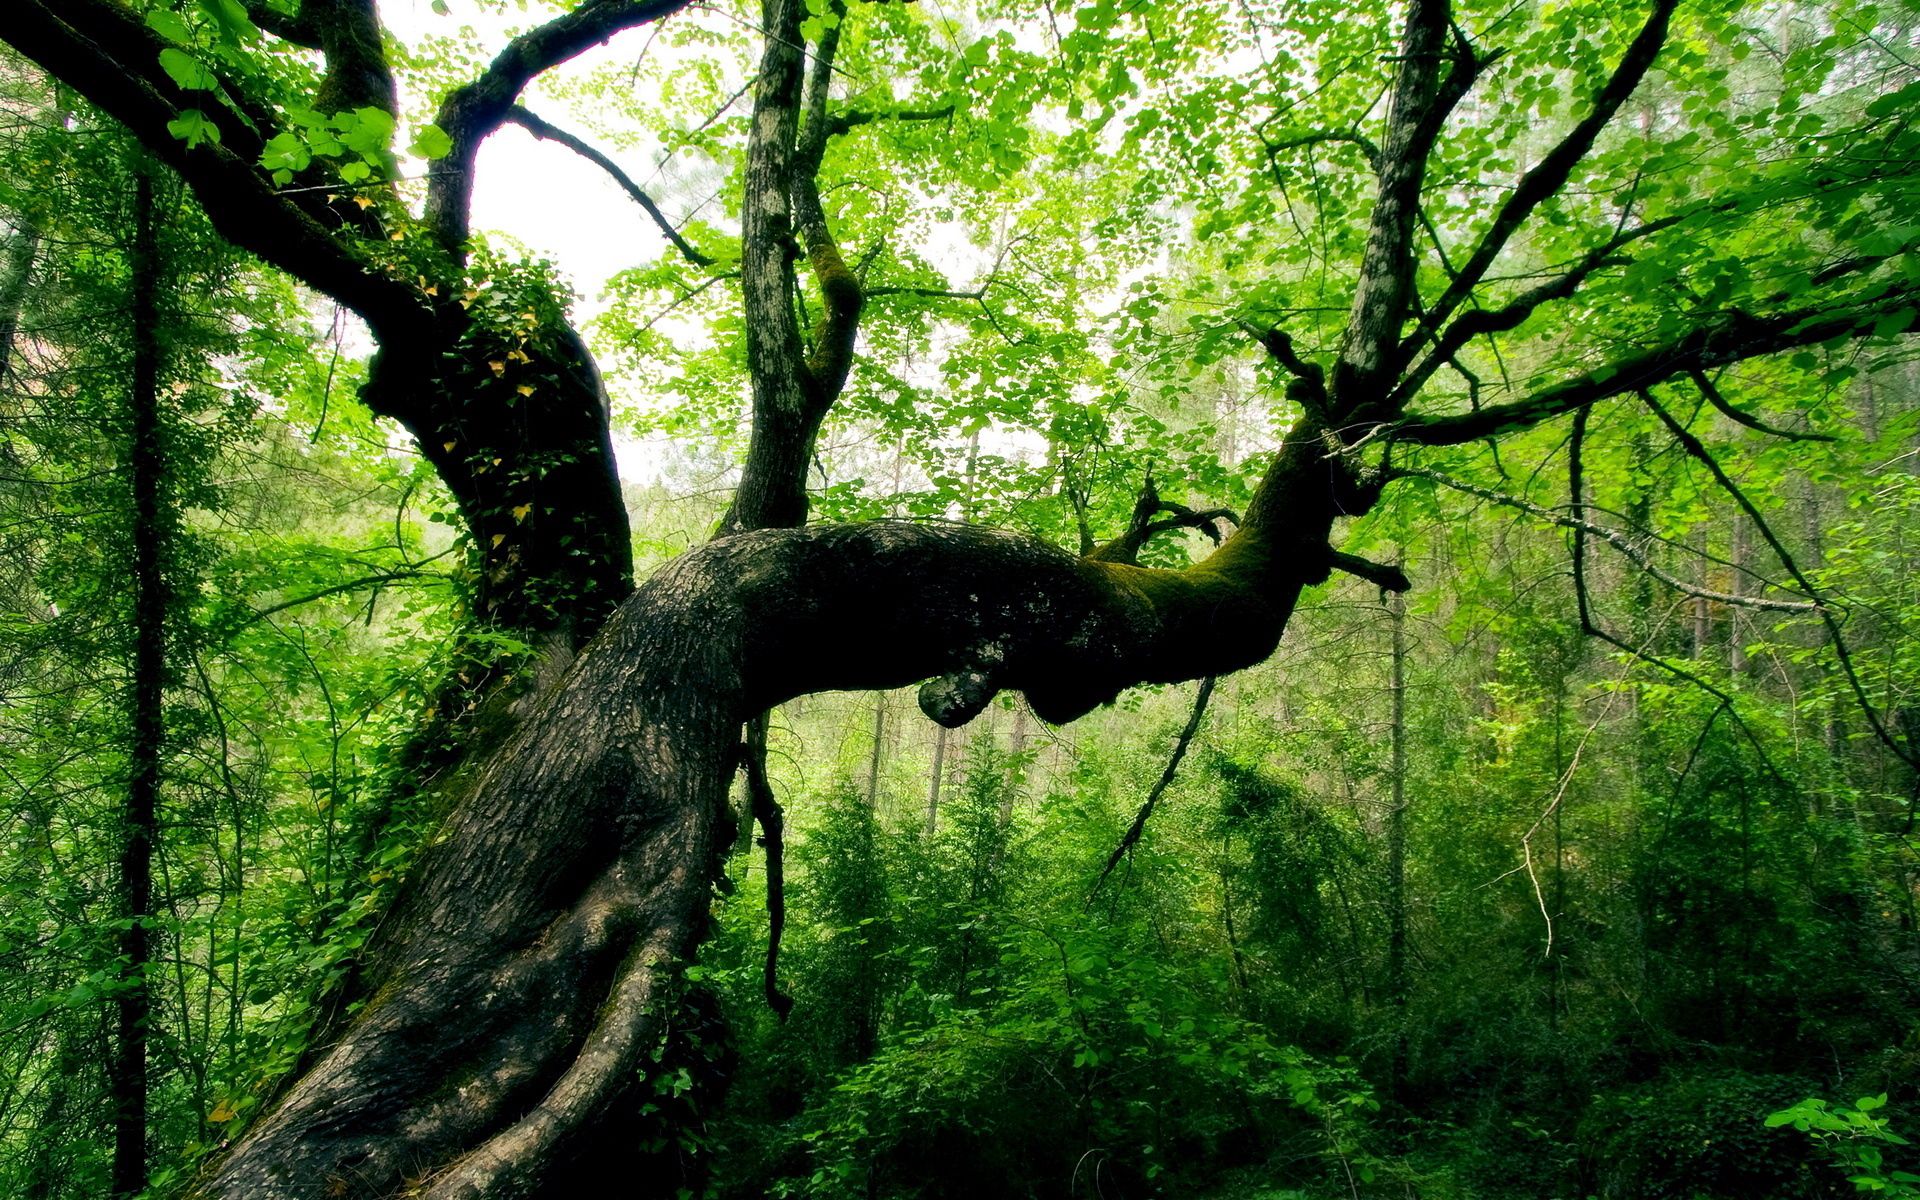 creepy, wood, nature, leaves, green, forest, tree, bends, trunk